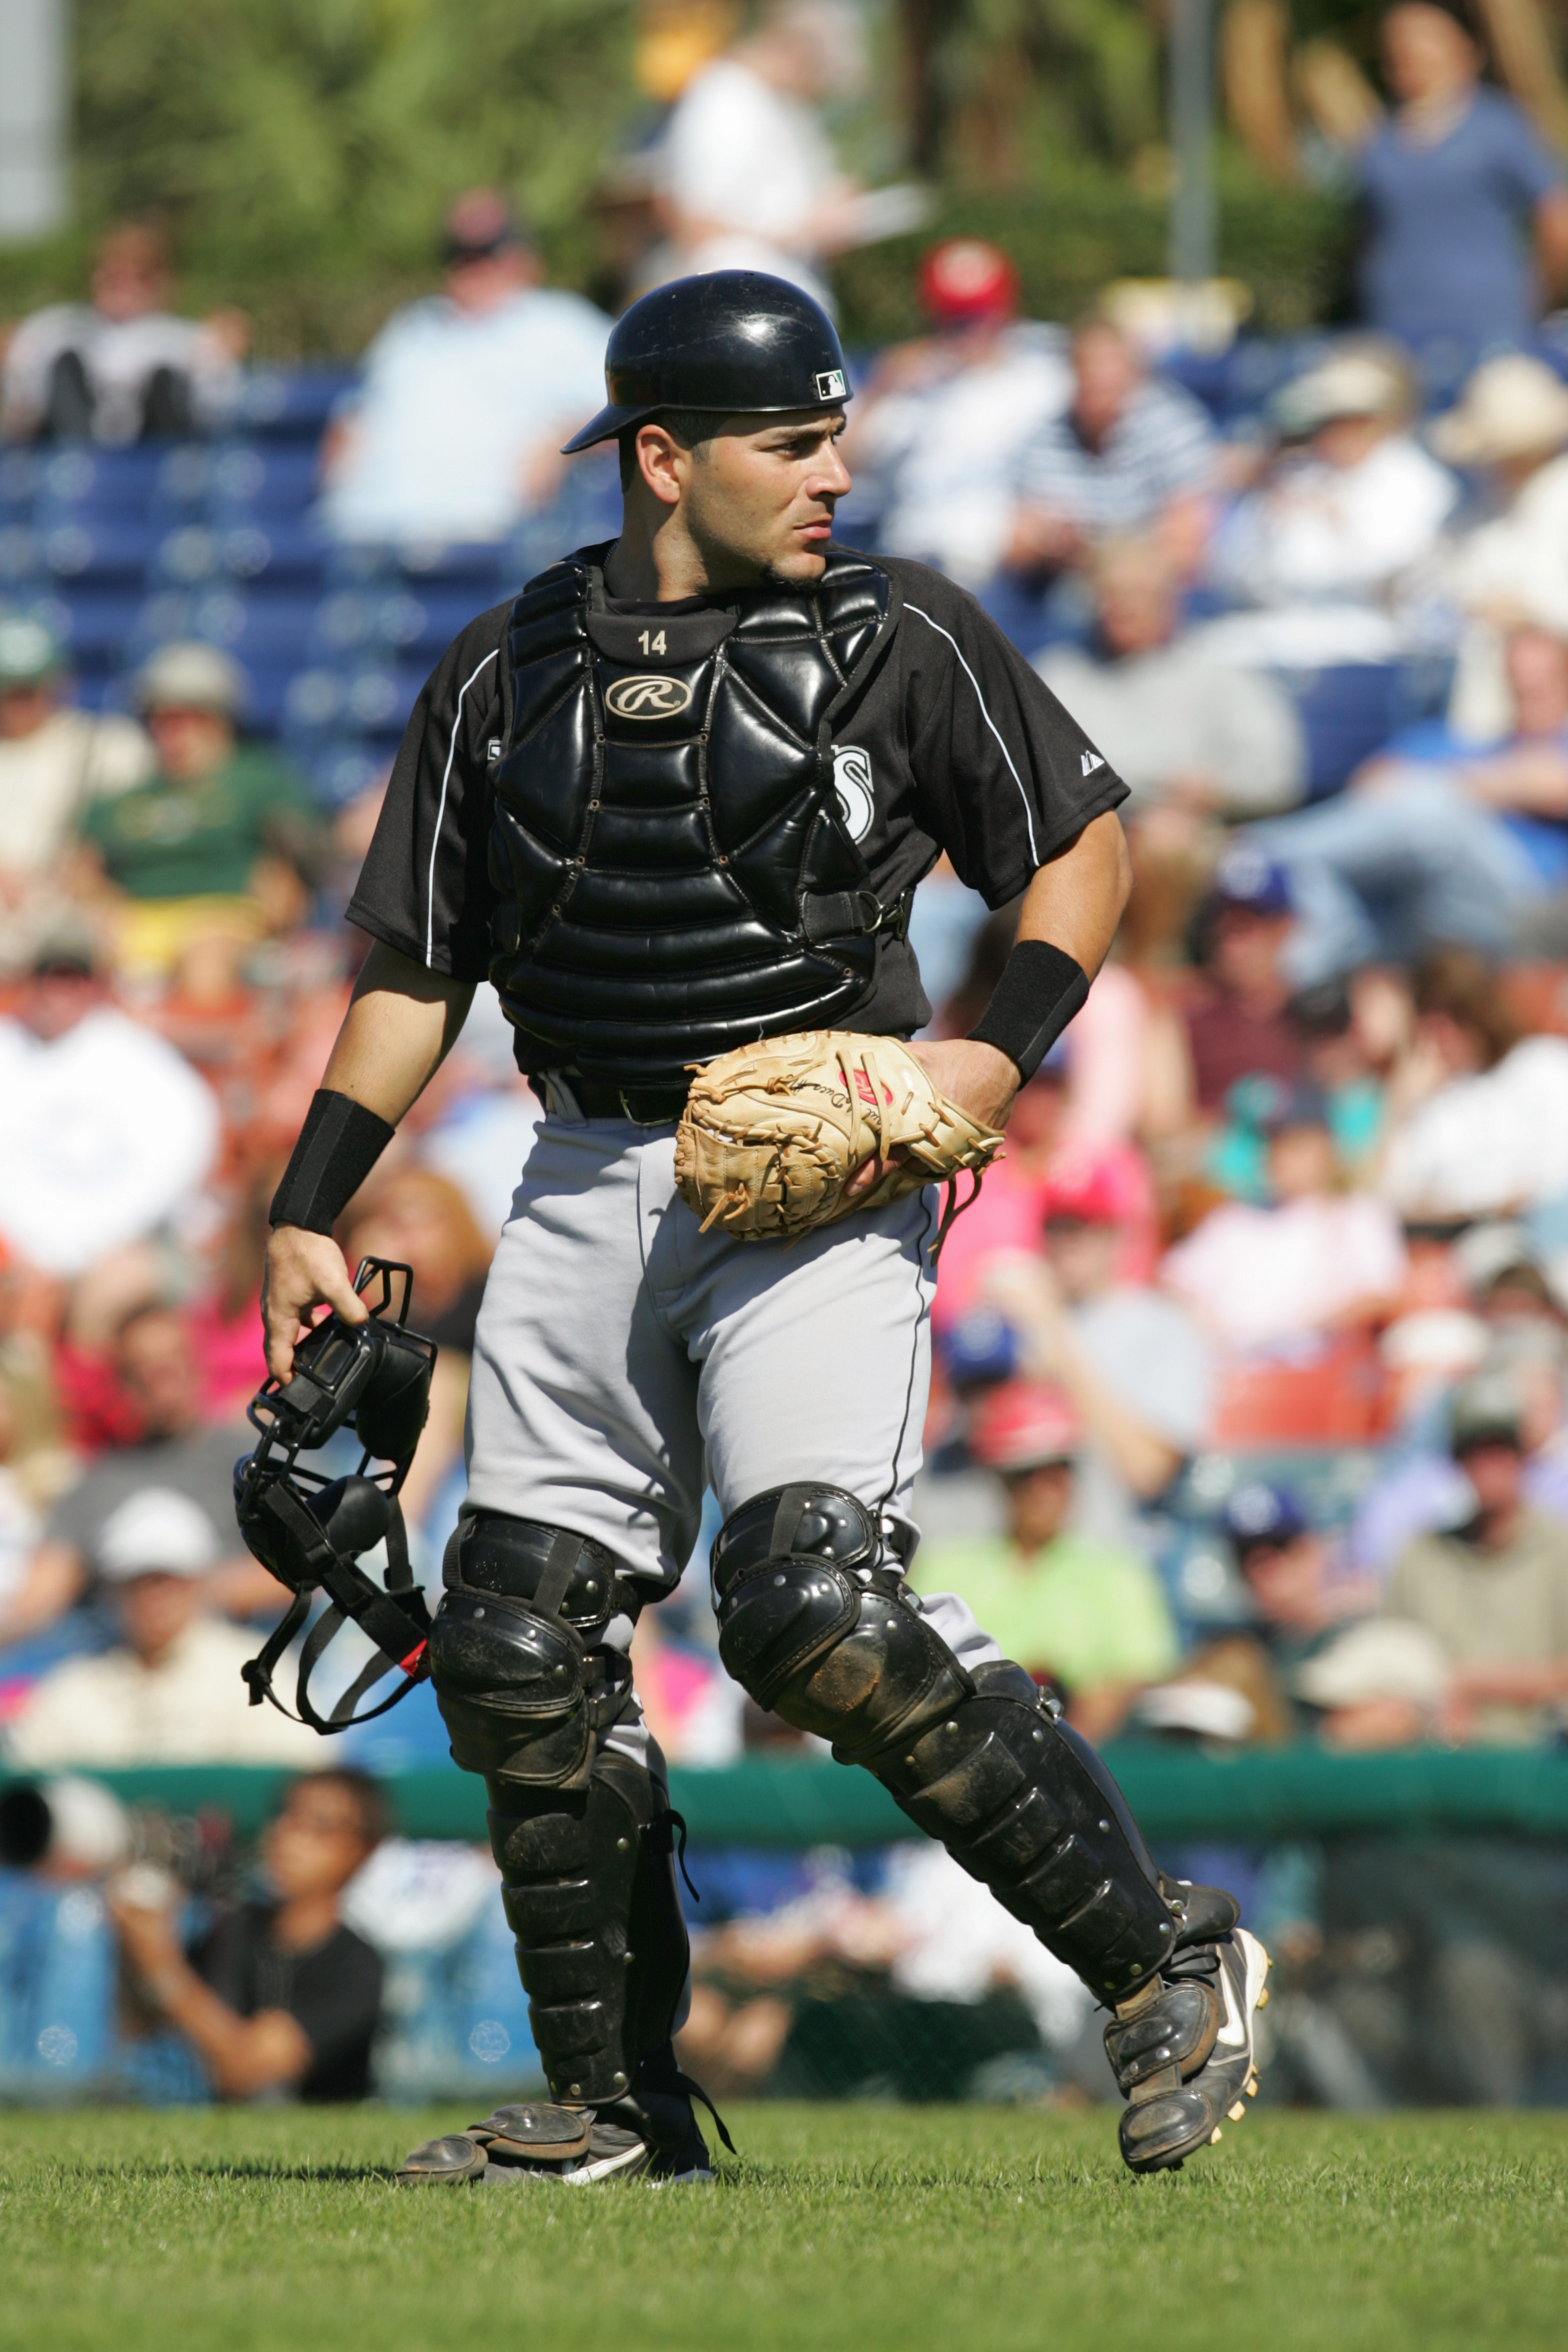 VERO BEACH, FL - MARCH 2:  Catcher Paul Lo Duca #16 of the Florida Marlins looks on against the Los Angeles Dodgers during MLB Spring Training on March 2, 2005 at Holman Stadium in Vero Beach, Florida. The Dodgers defeated the Marlins 4-2.  (Photo by Rona